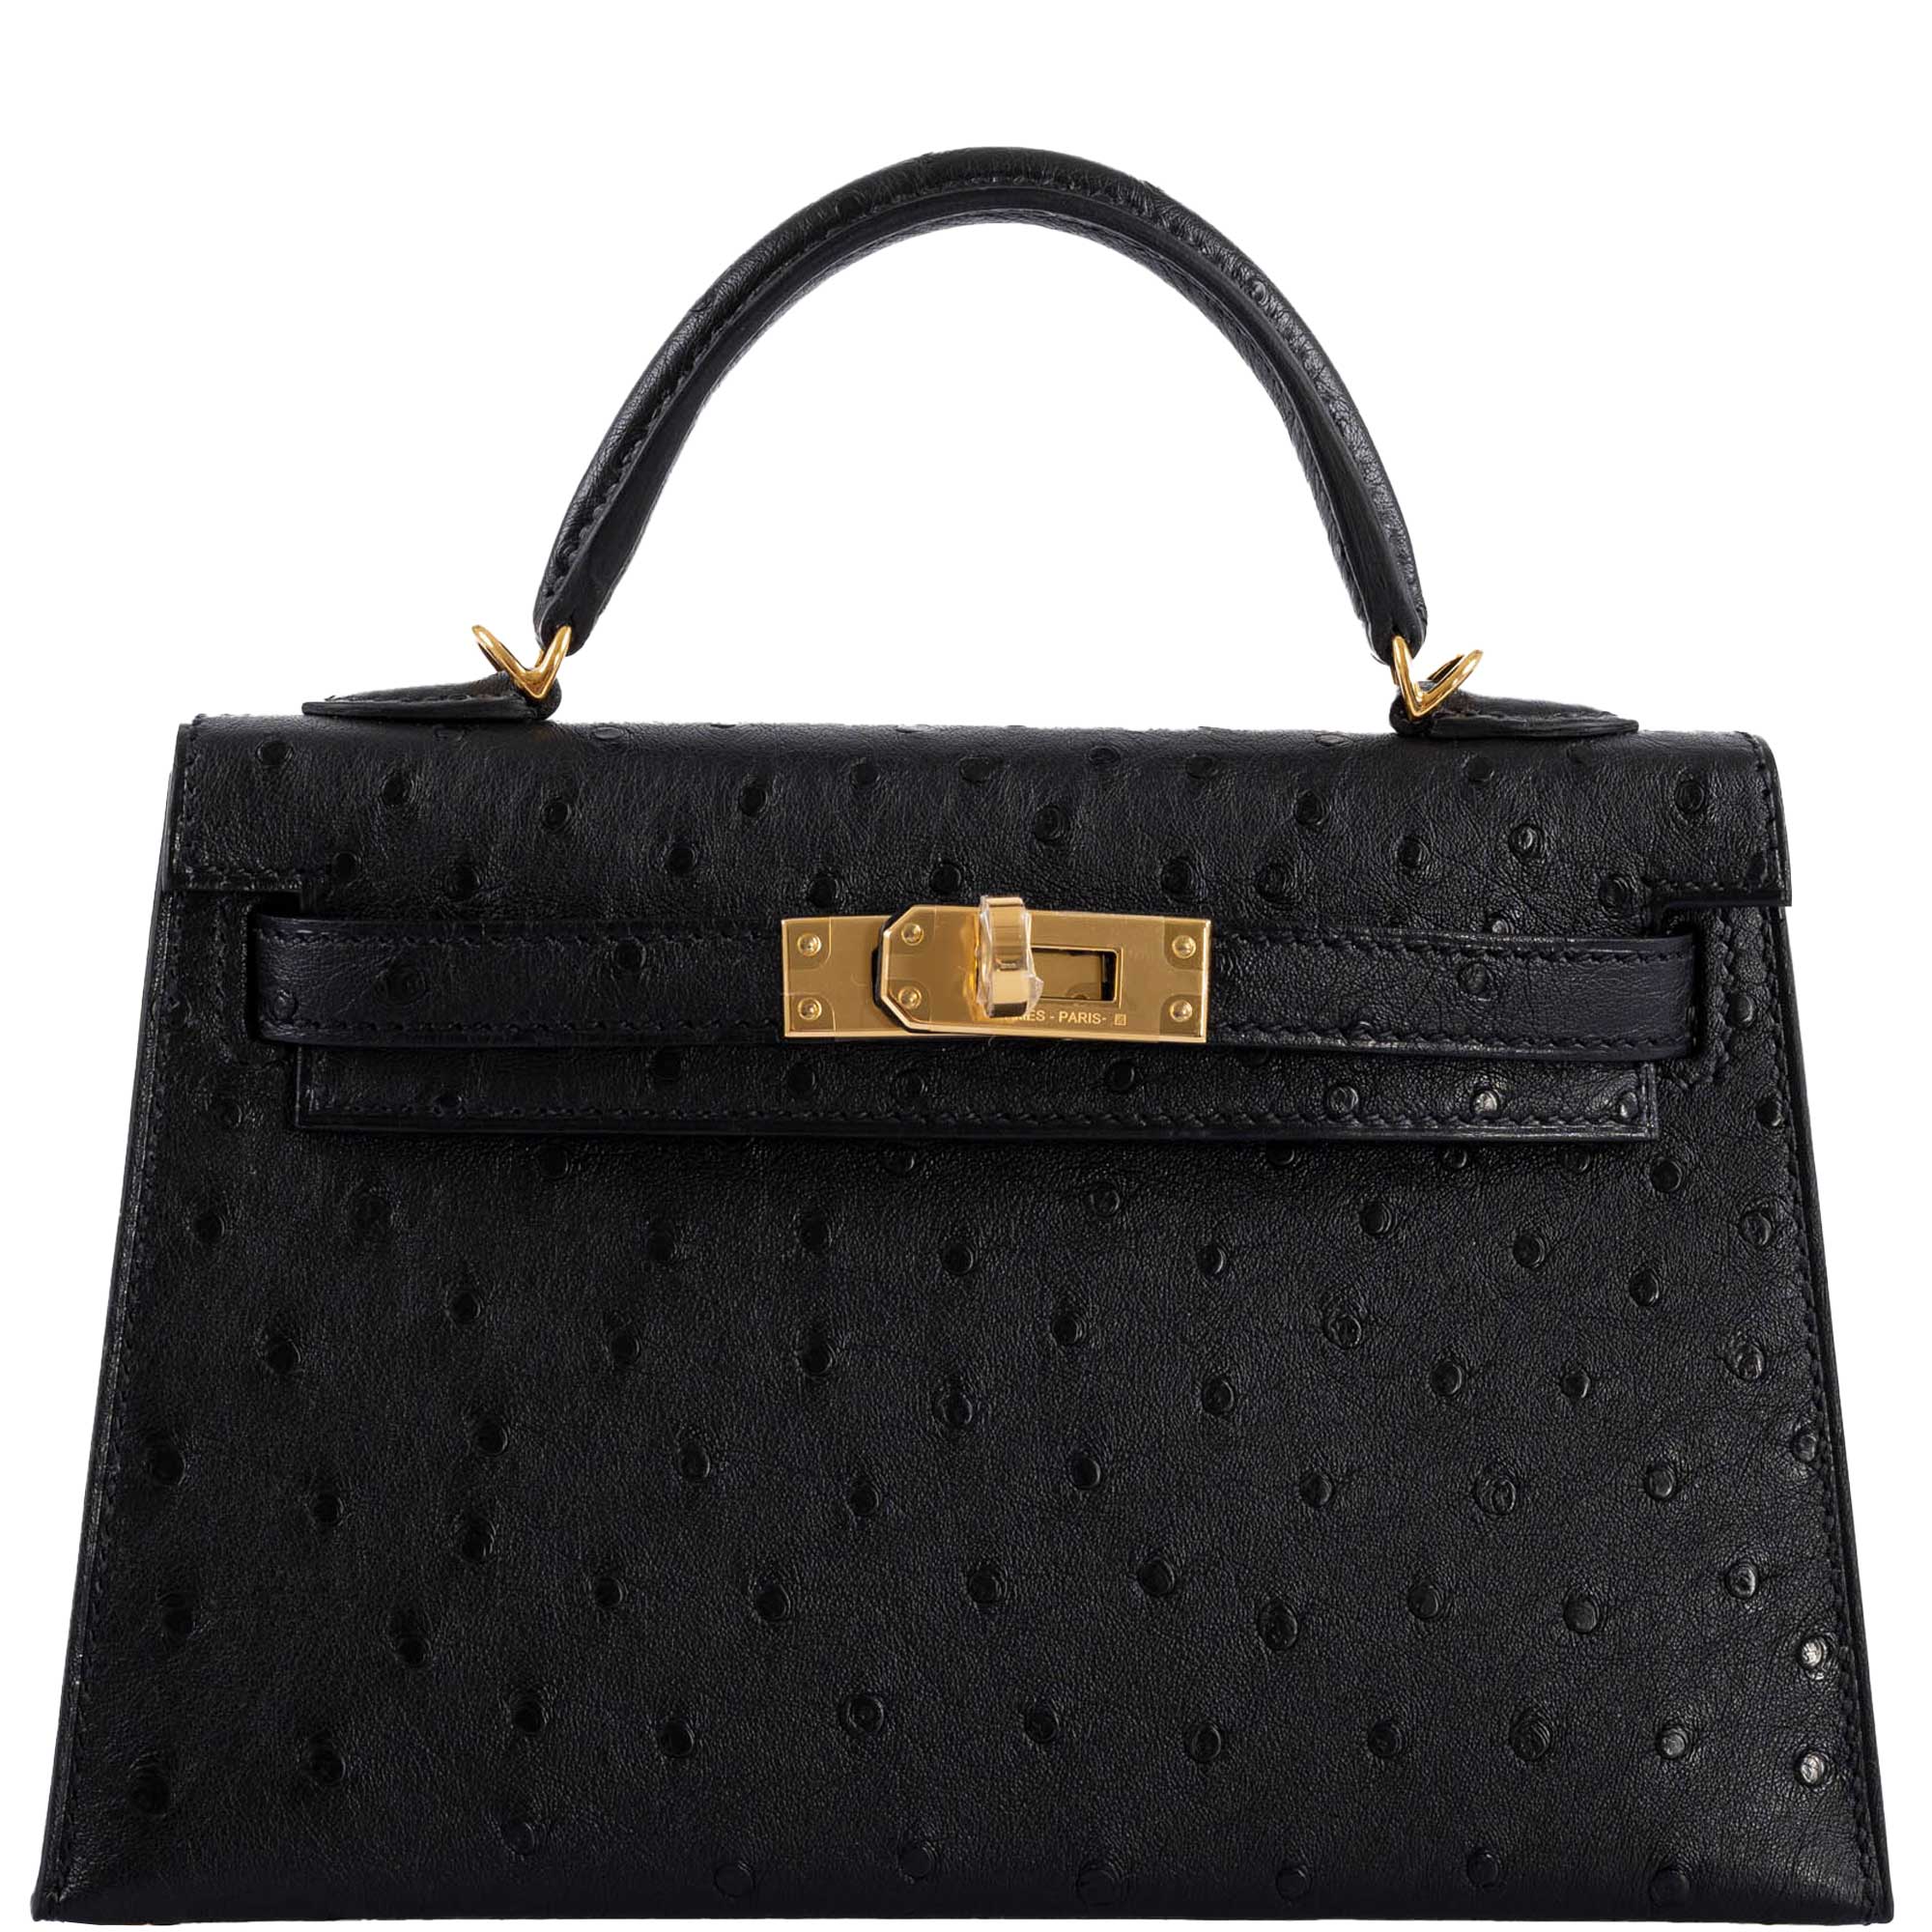 COLLECTOR ITEM Hermes Kelly Mini Black Ostrich 20 cm, From a collection of  rare vintage handbags and purse…